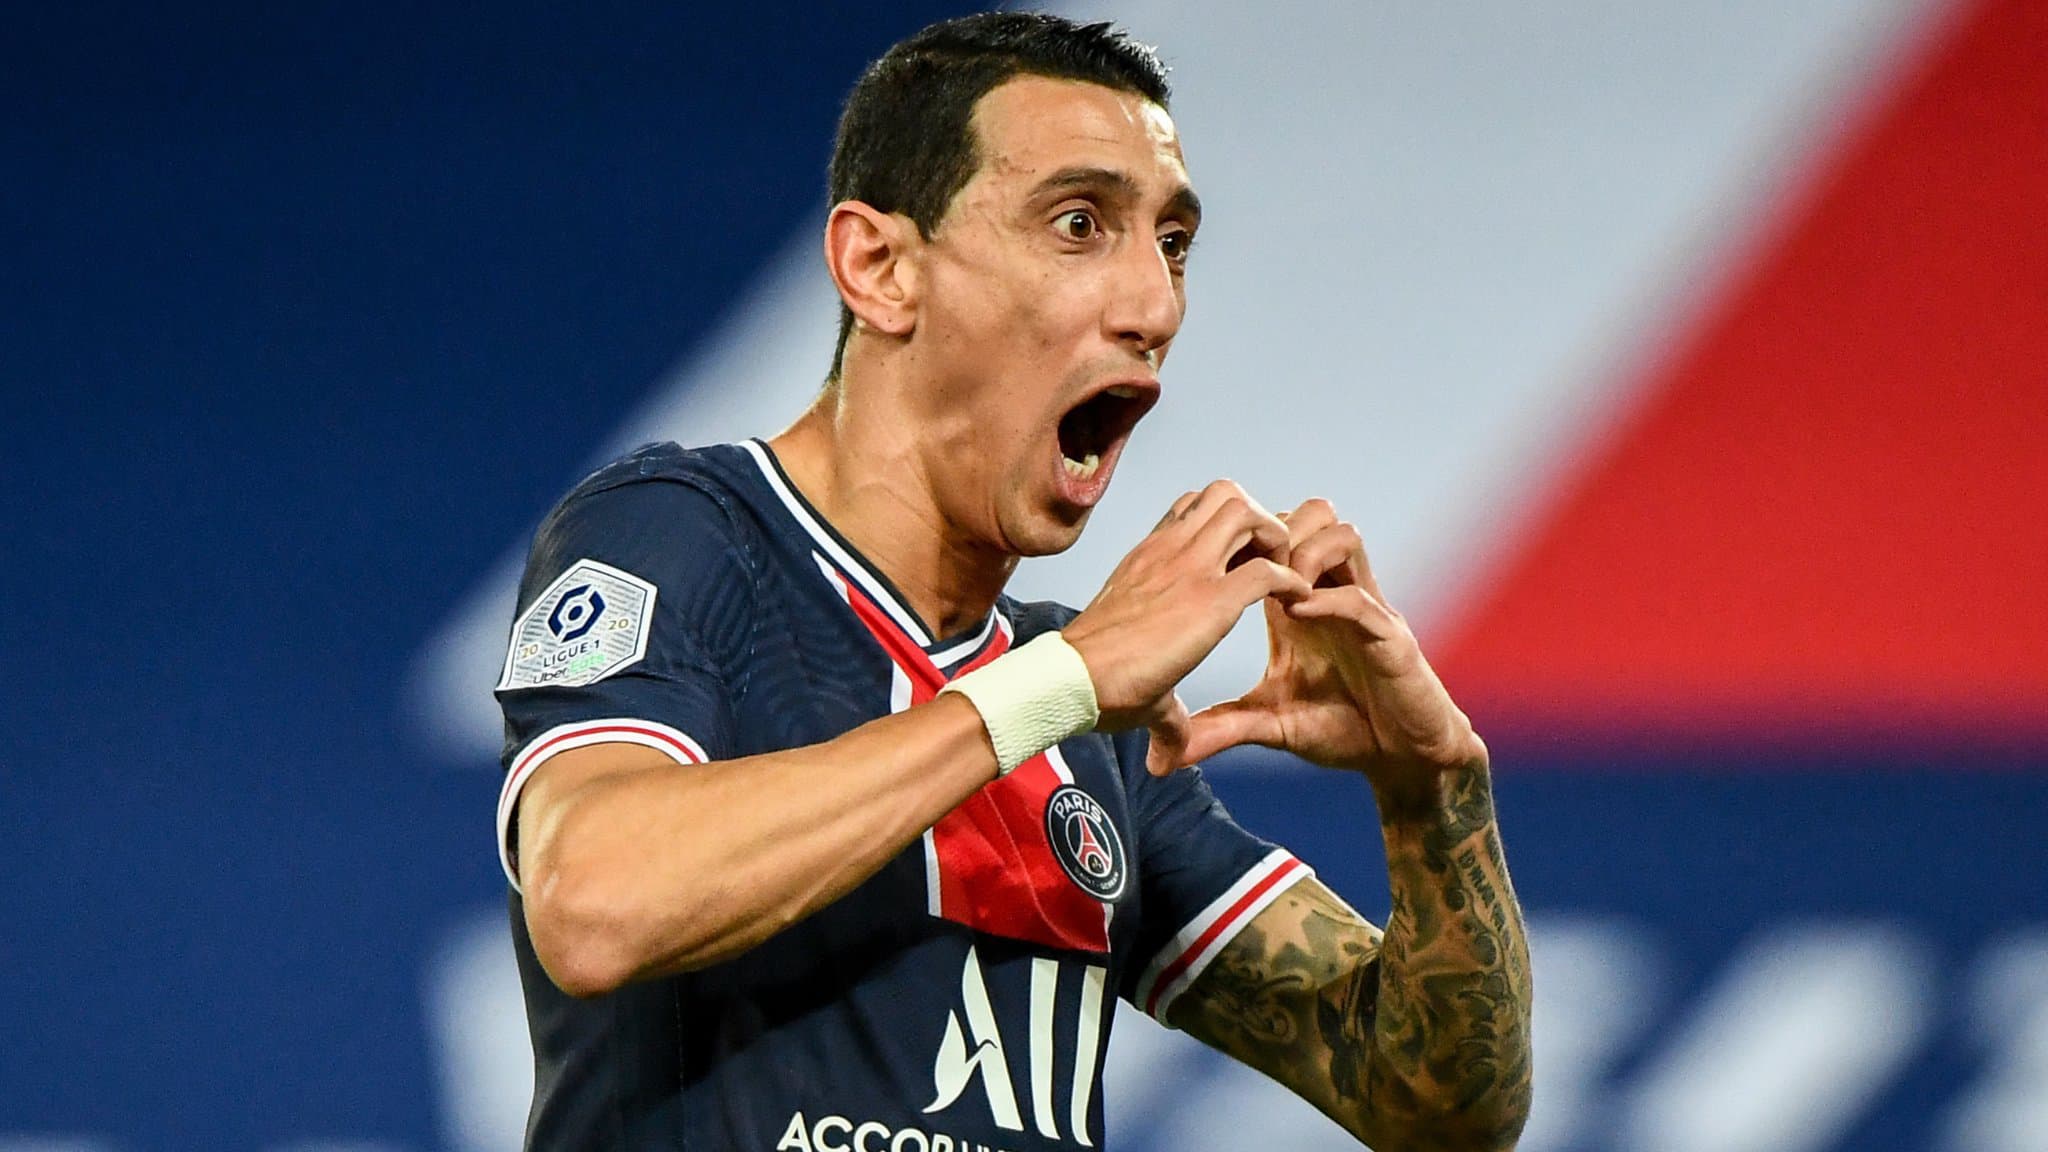 Di Maria overtakes Susic and becomes the best passer in club history